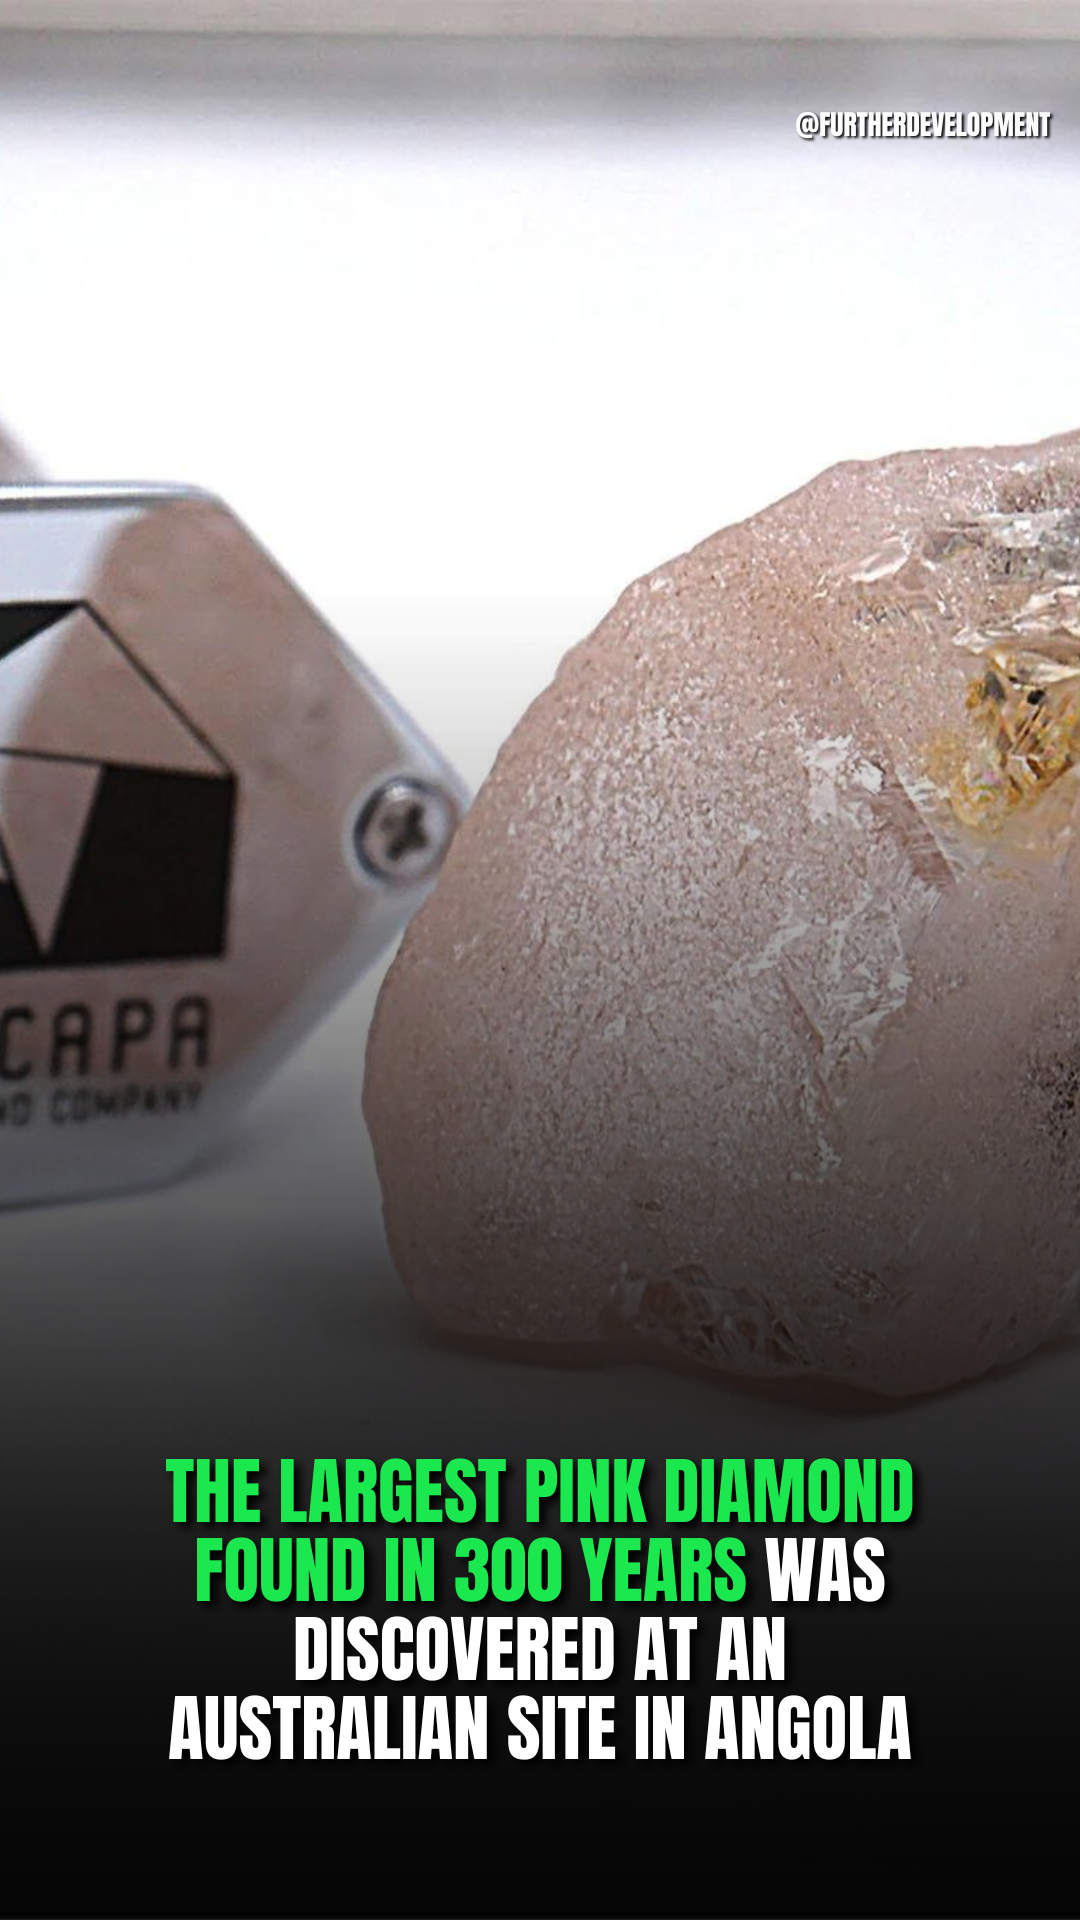 THE LARGEST PINK DIAMOND FOUND IN 300 YEARS WAS DISCOVERED AT AN AUSTRALIAN SITE IN ANGOLA